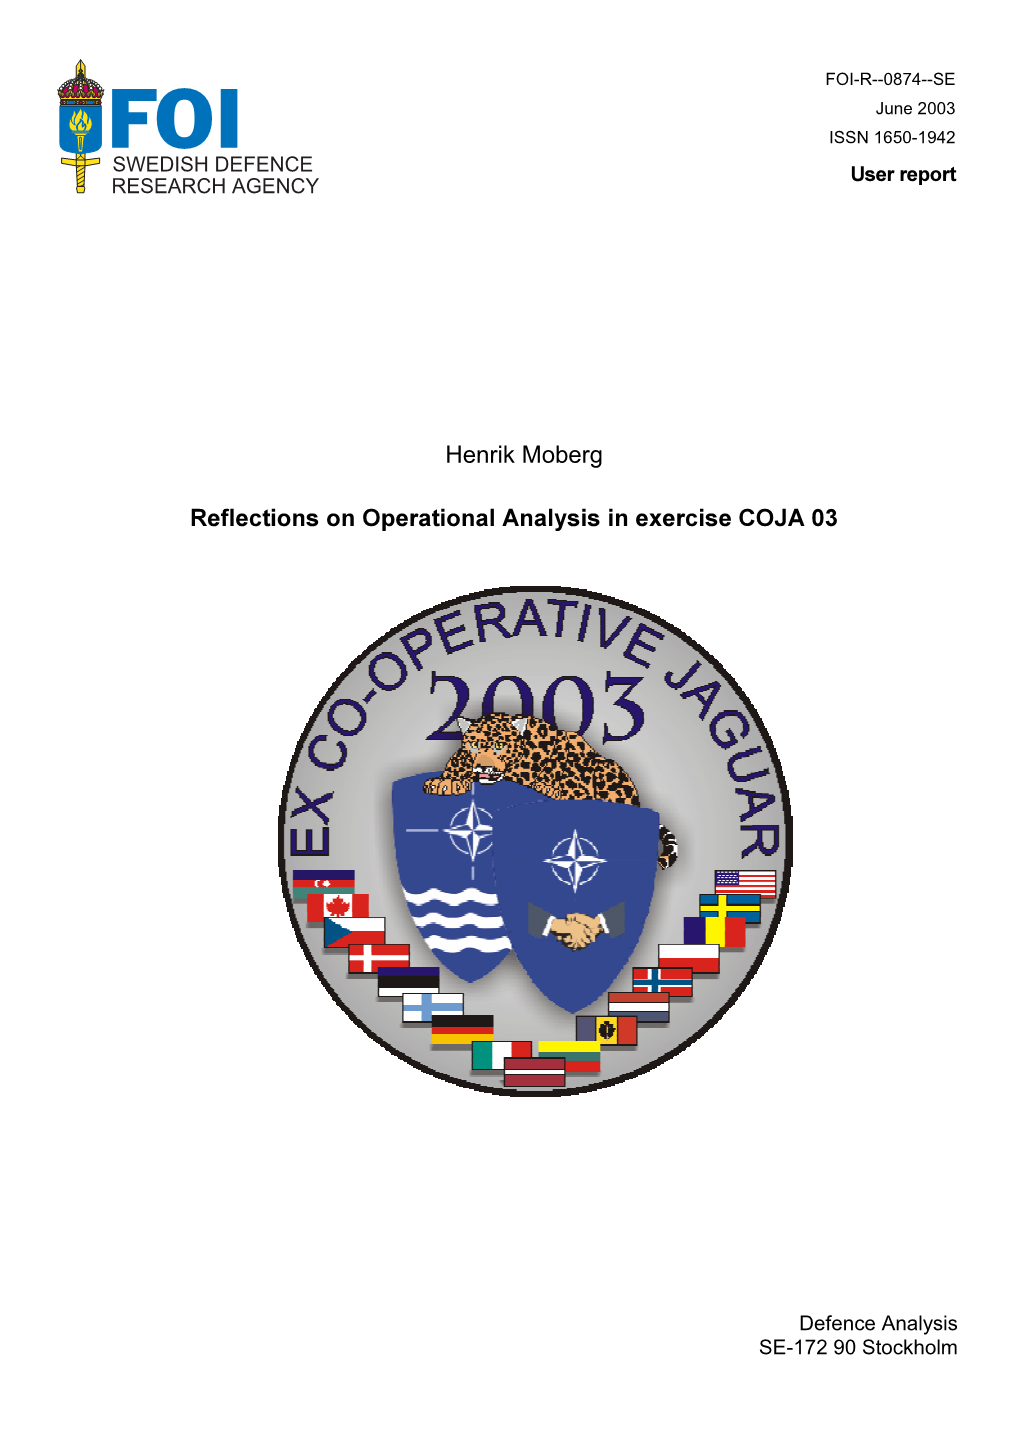 Reflections on Operational Analysis in Exercise COJA